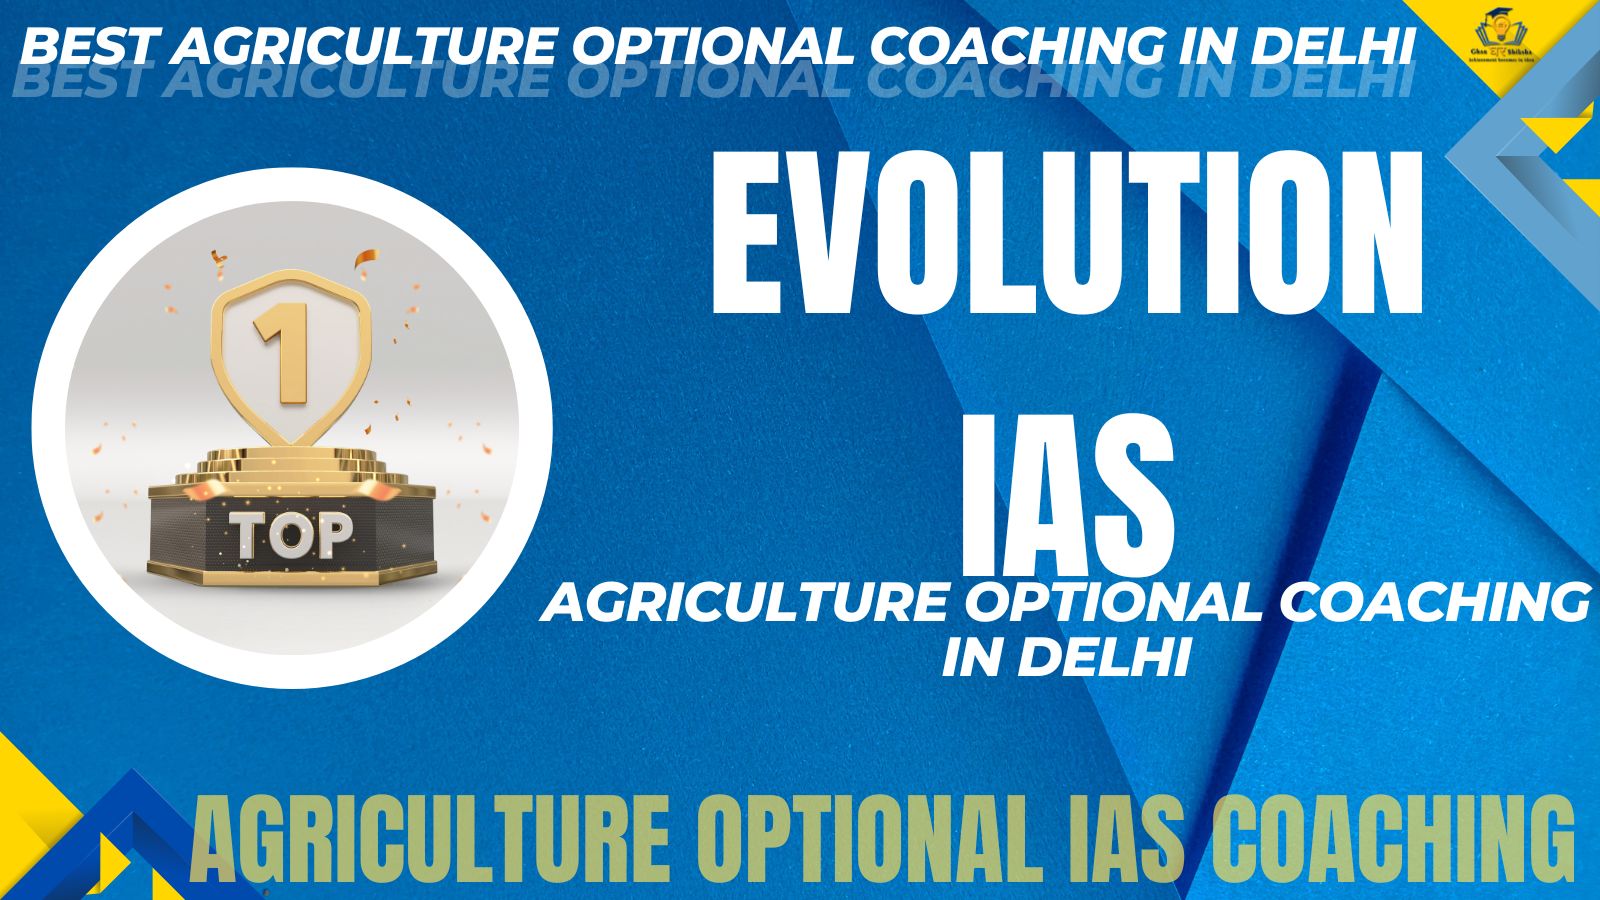 Top Agriculture Optional Coaching of Delhi